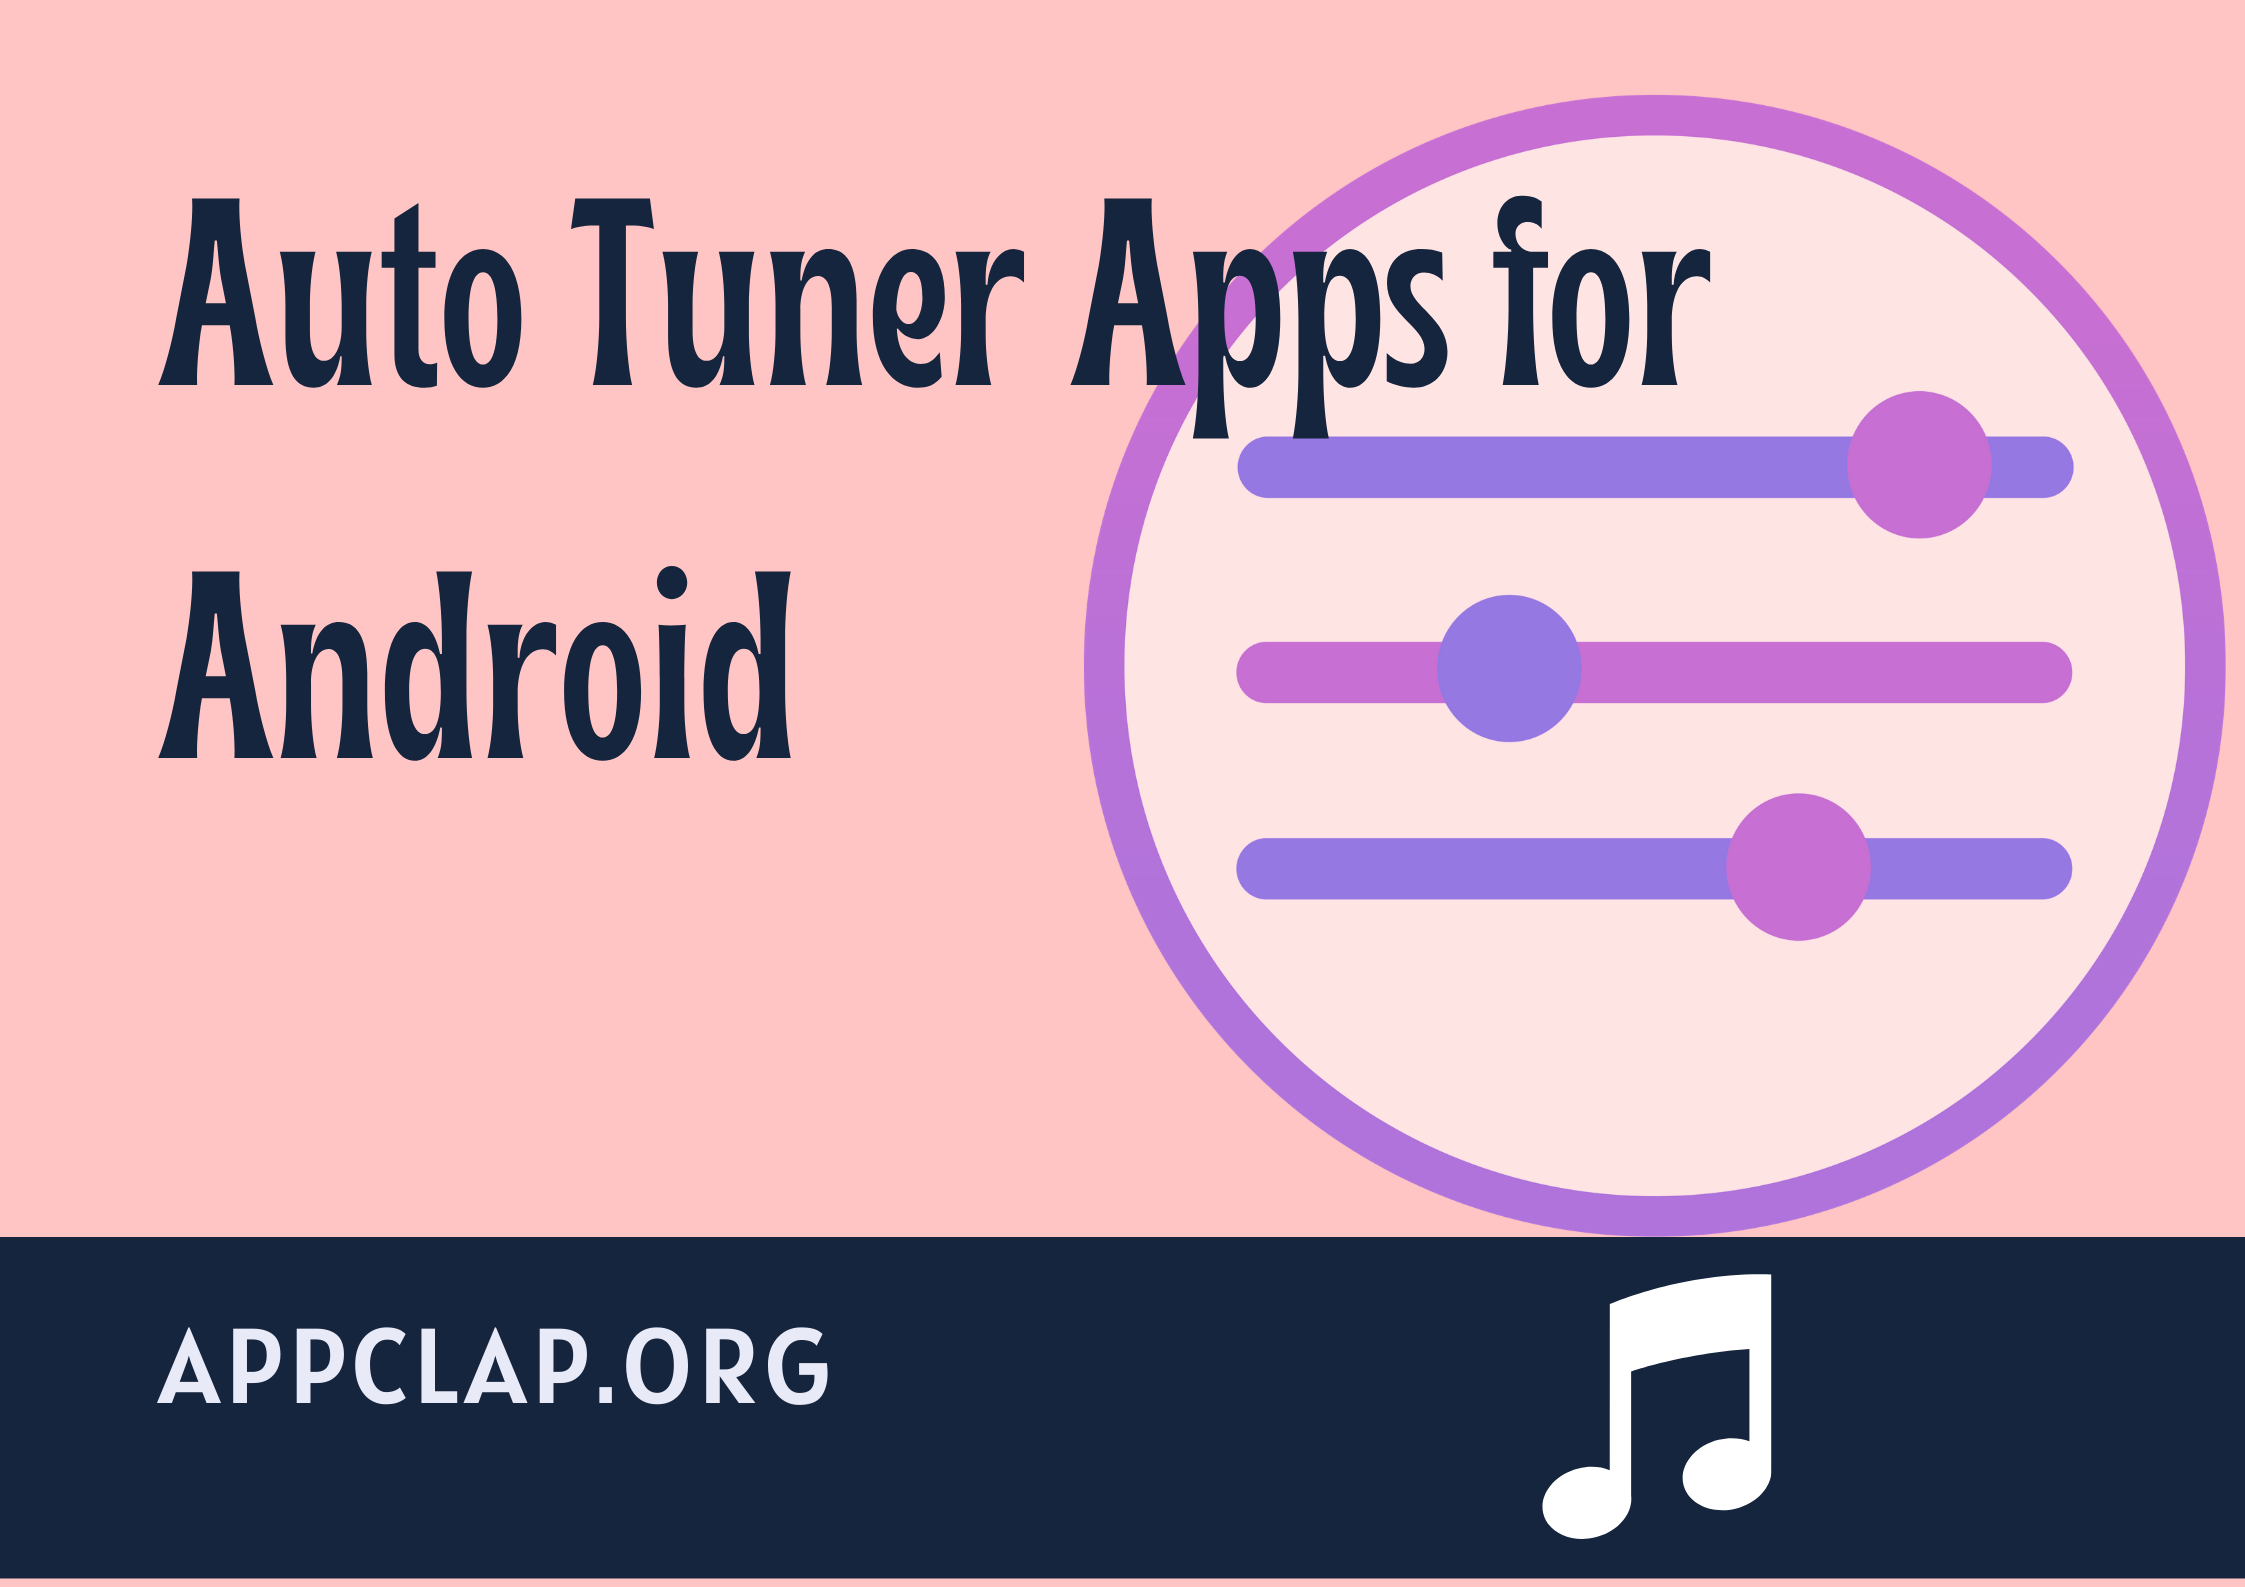 Auto Tuner Apps for Android